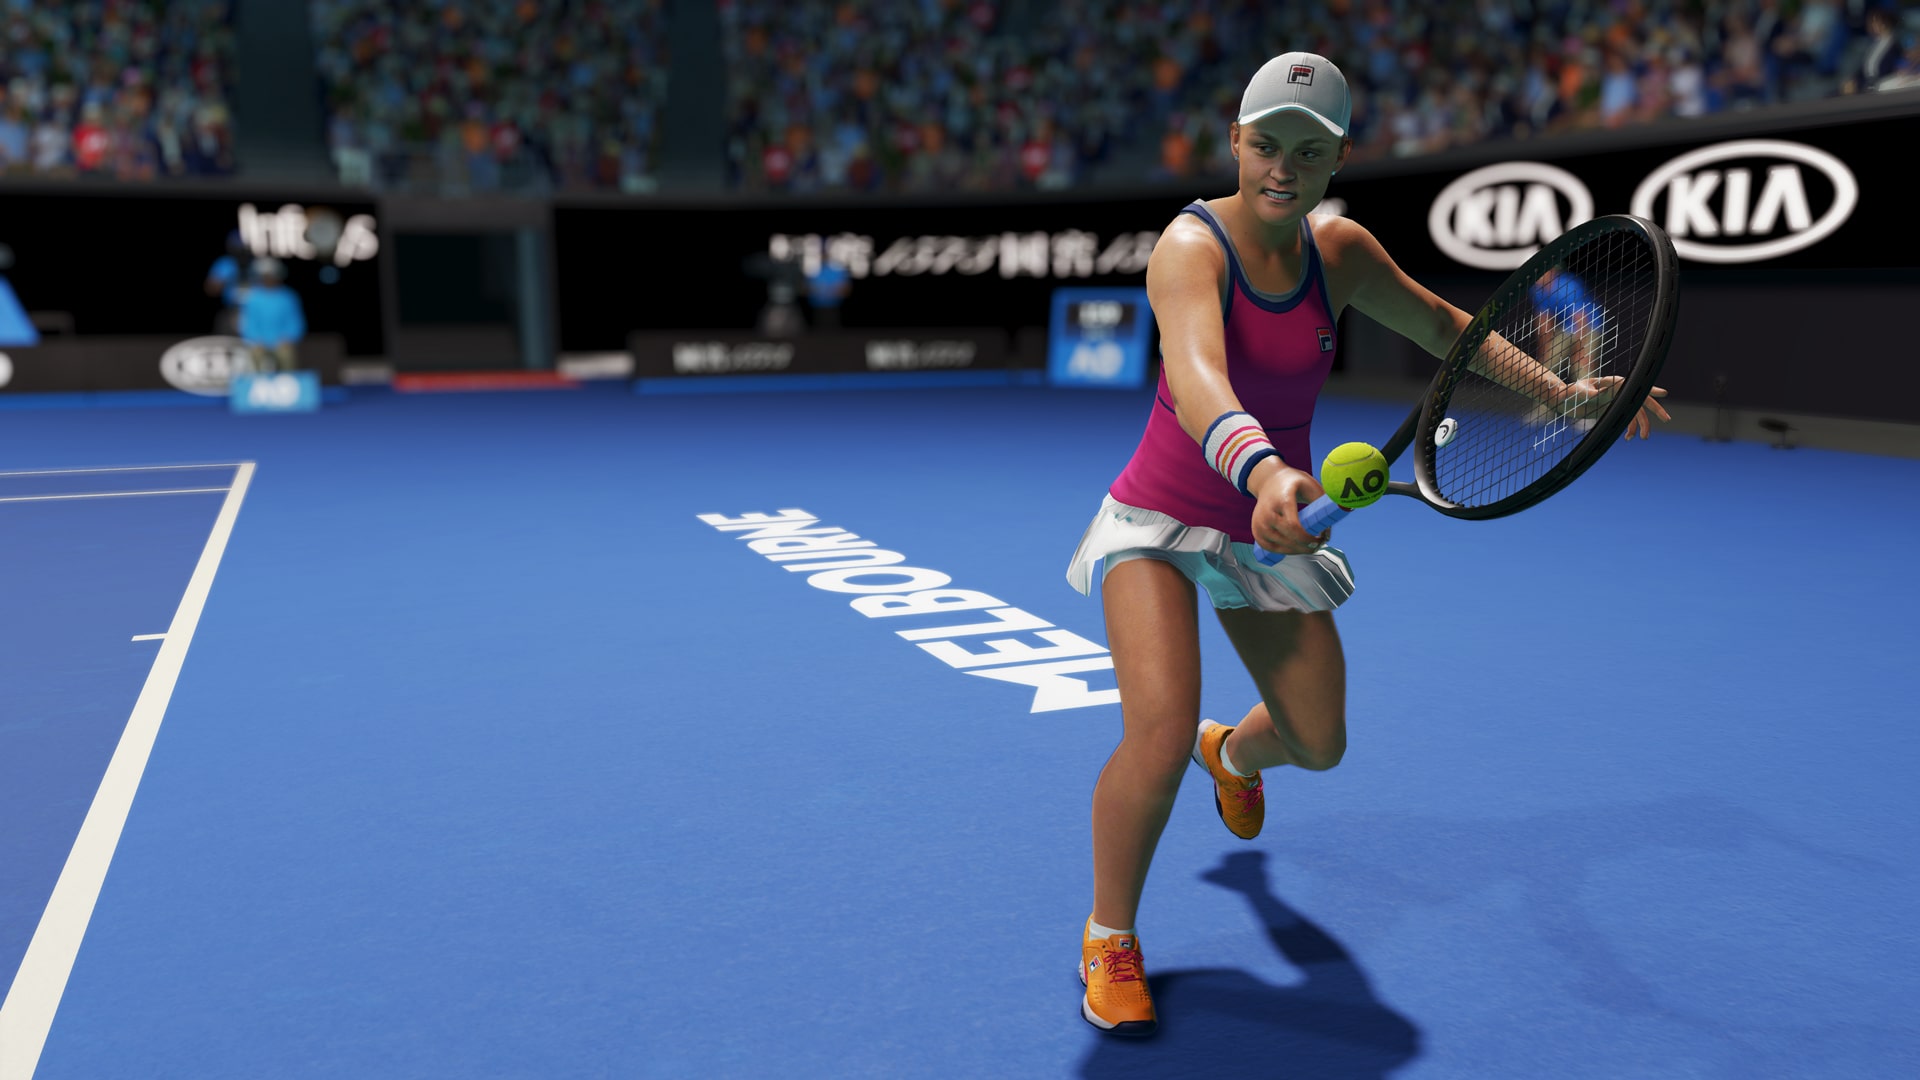 ao tennis 2 playstation store